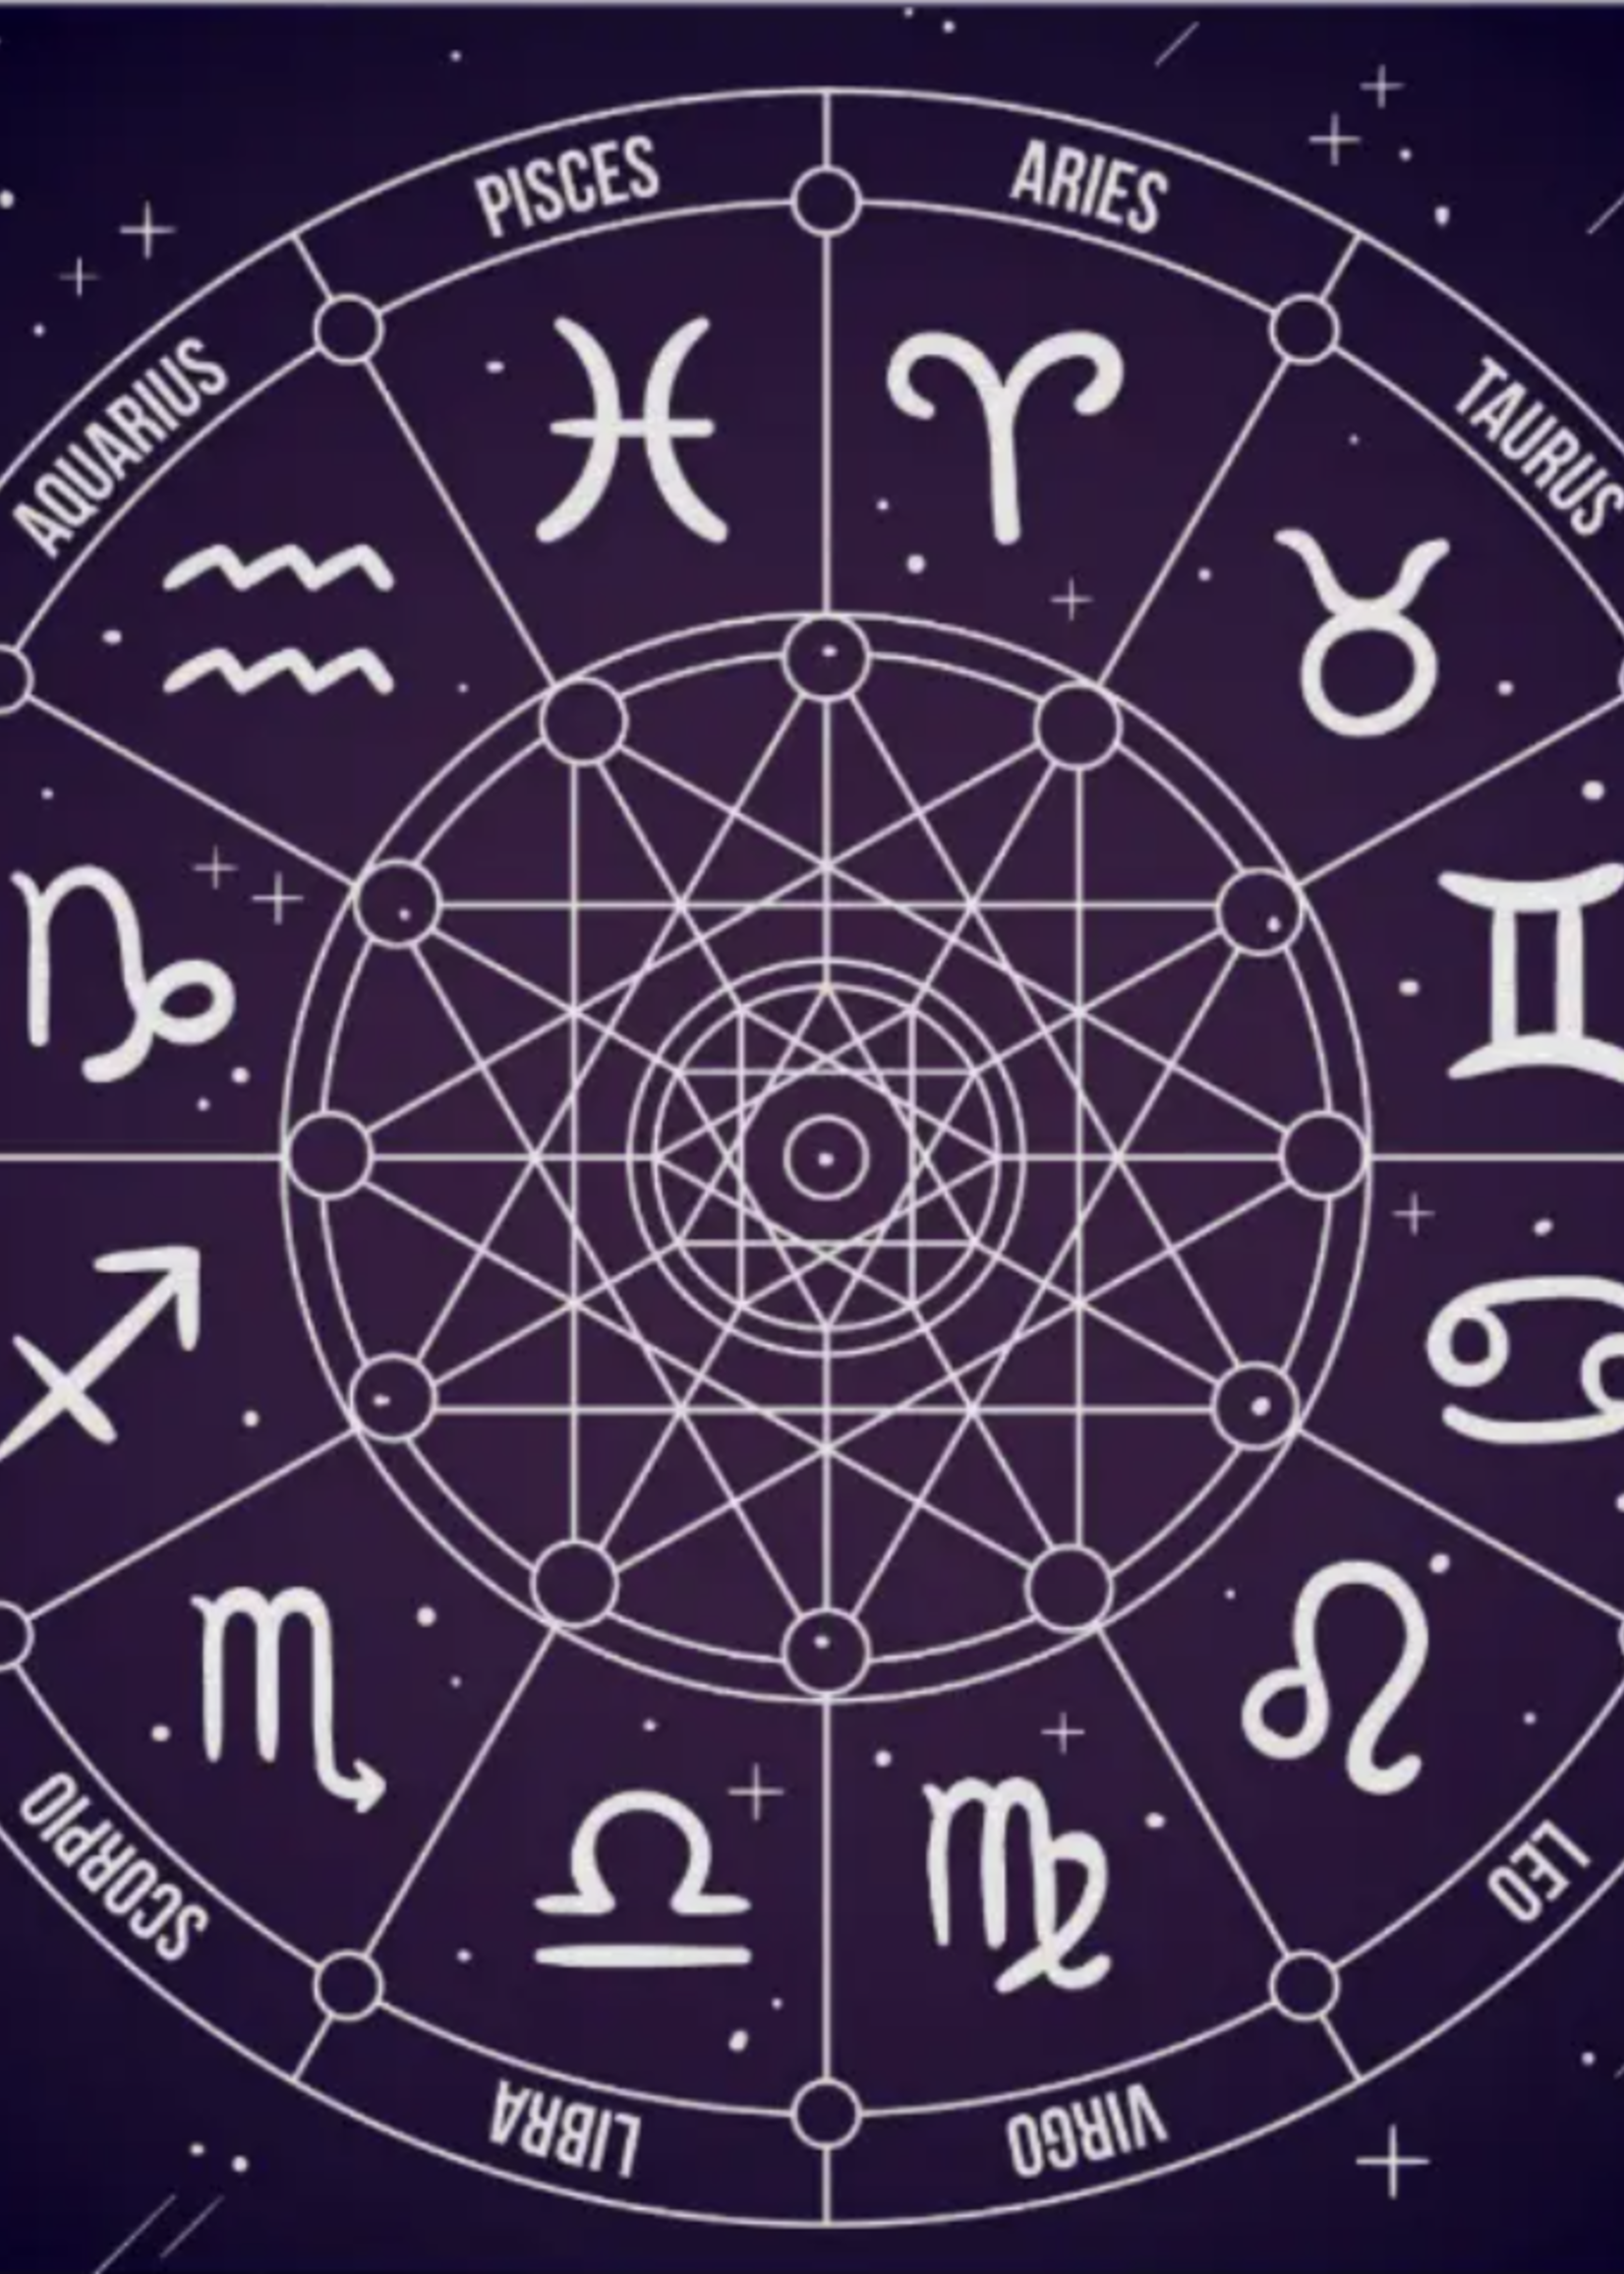 Theresa Mariesa 4-Part Astrology Series: A Journey Through the Stars and Signs